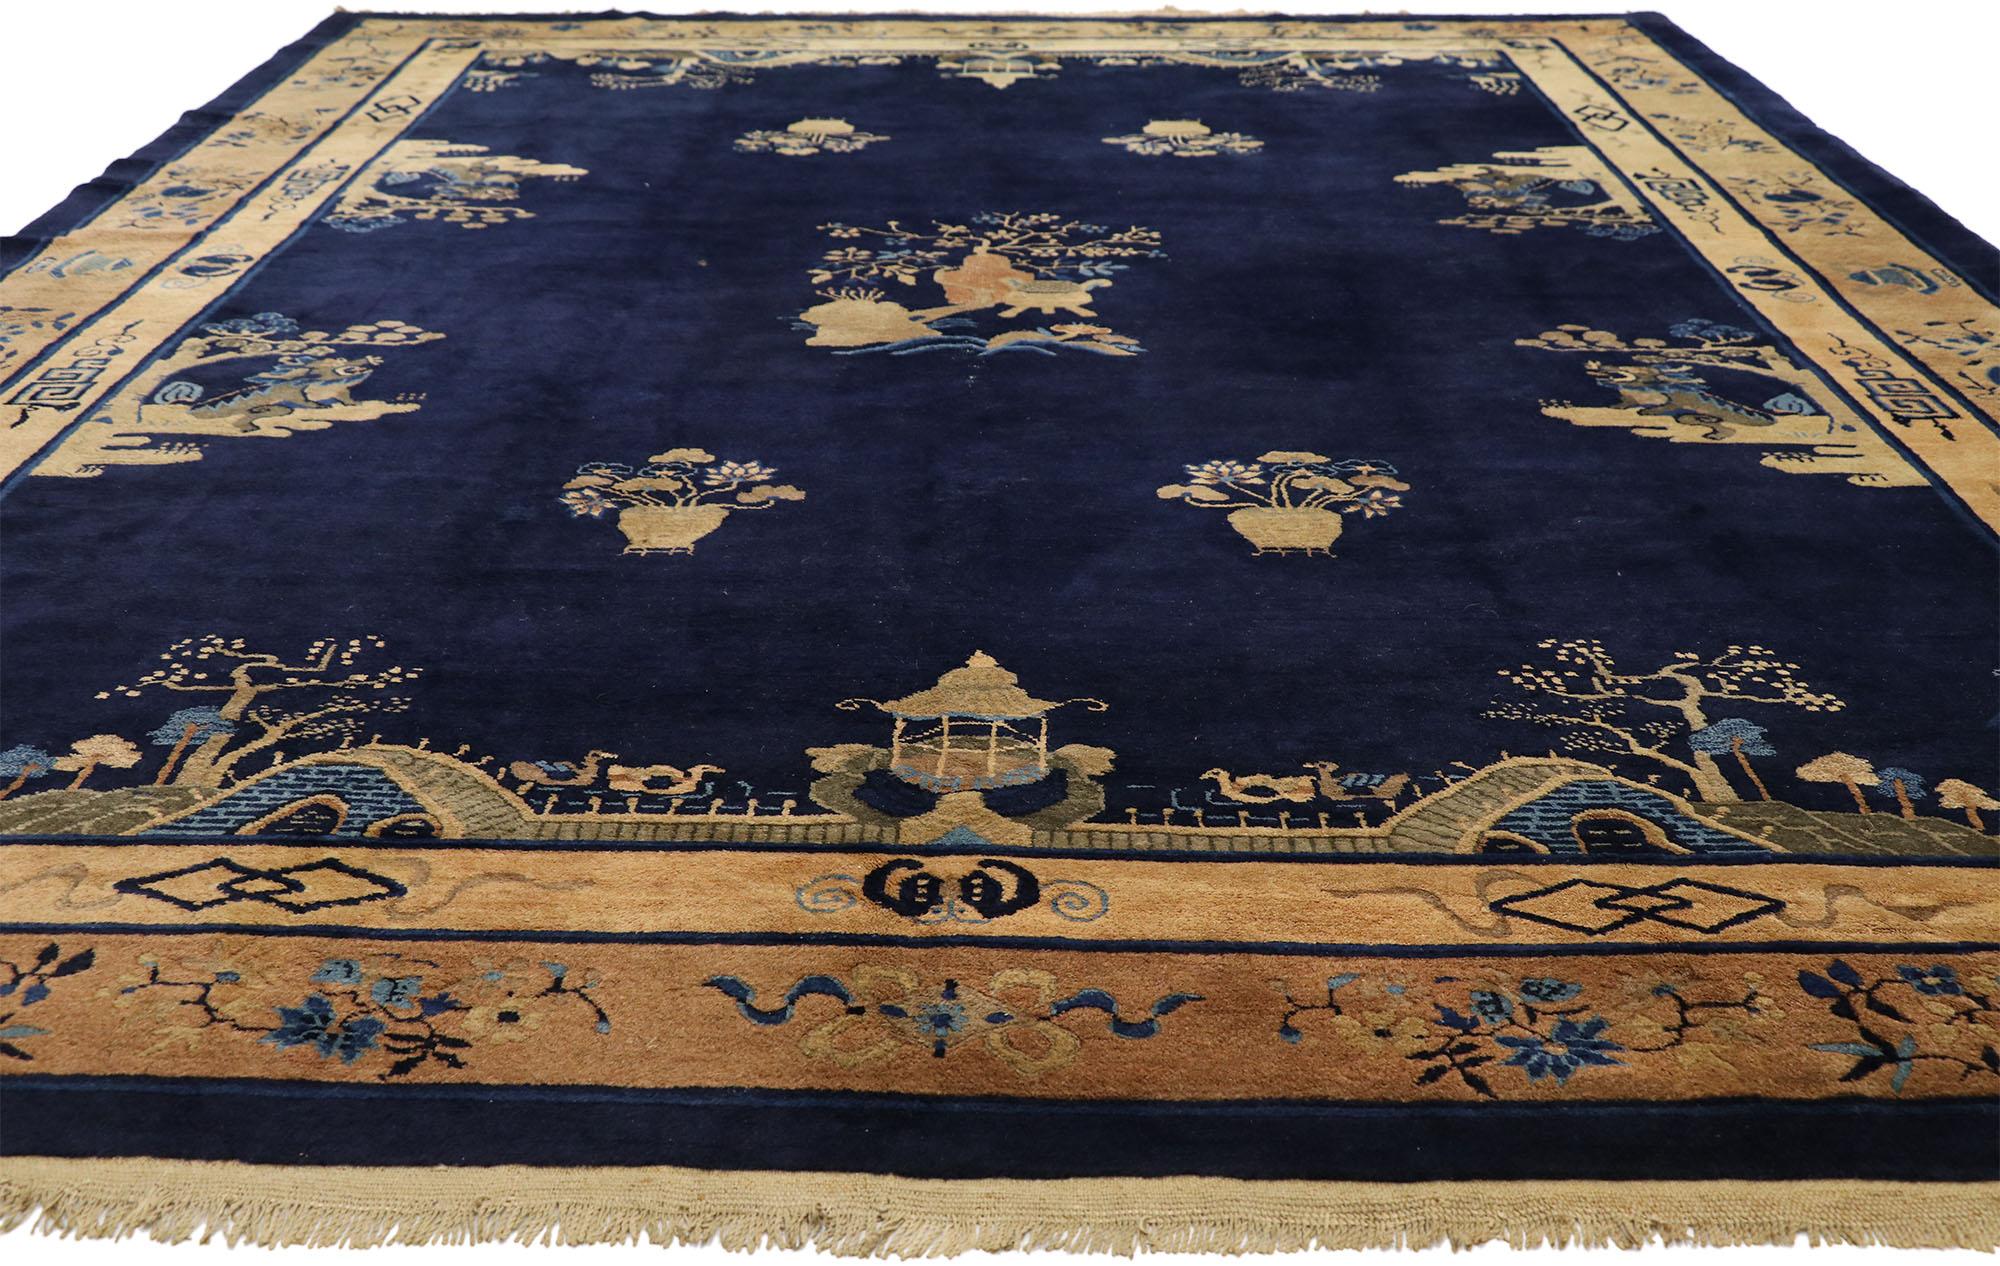 Hand-Knotted Antique Chinese Peking Rug with Landscape Scenes and Chinoiserie Style